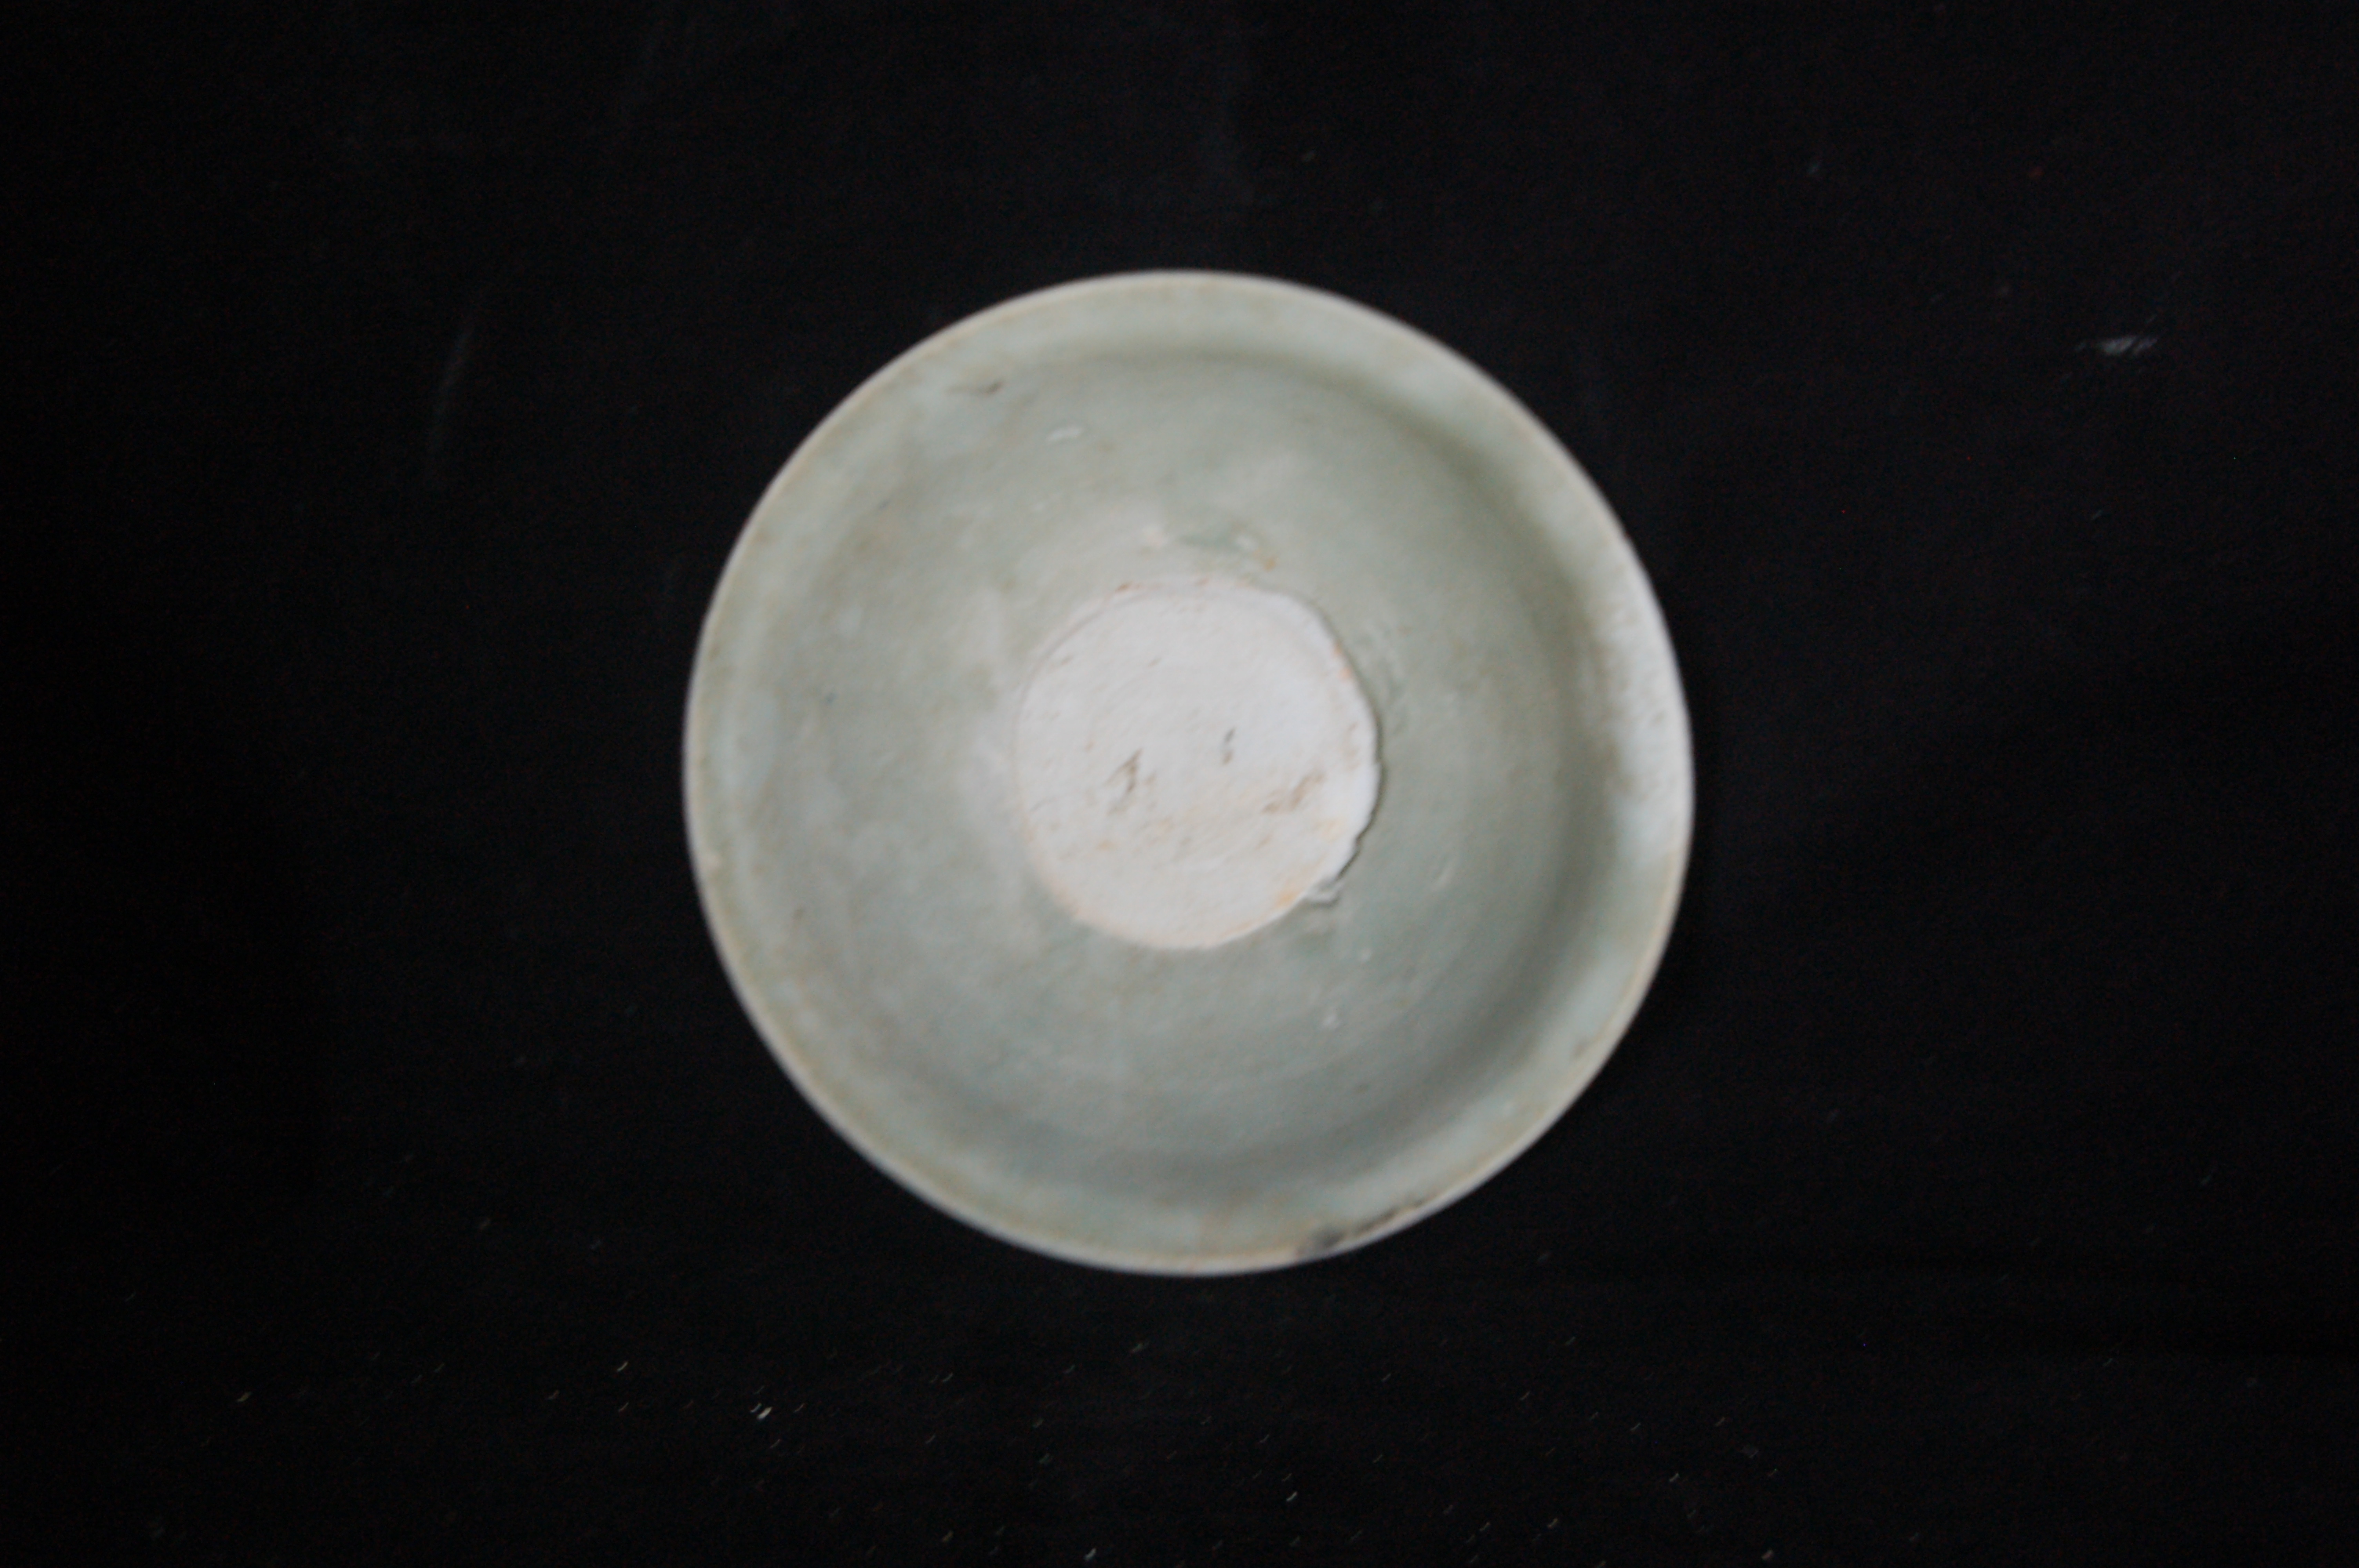 Small shallow bowl flattened everted rim, lightly incised ring in the well, a rounded wall and a flat base. Diameter 11 cm, height 2.5 cm.